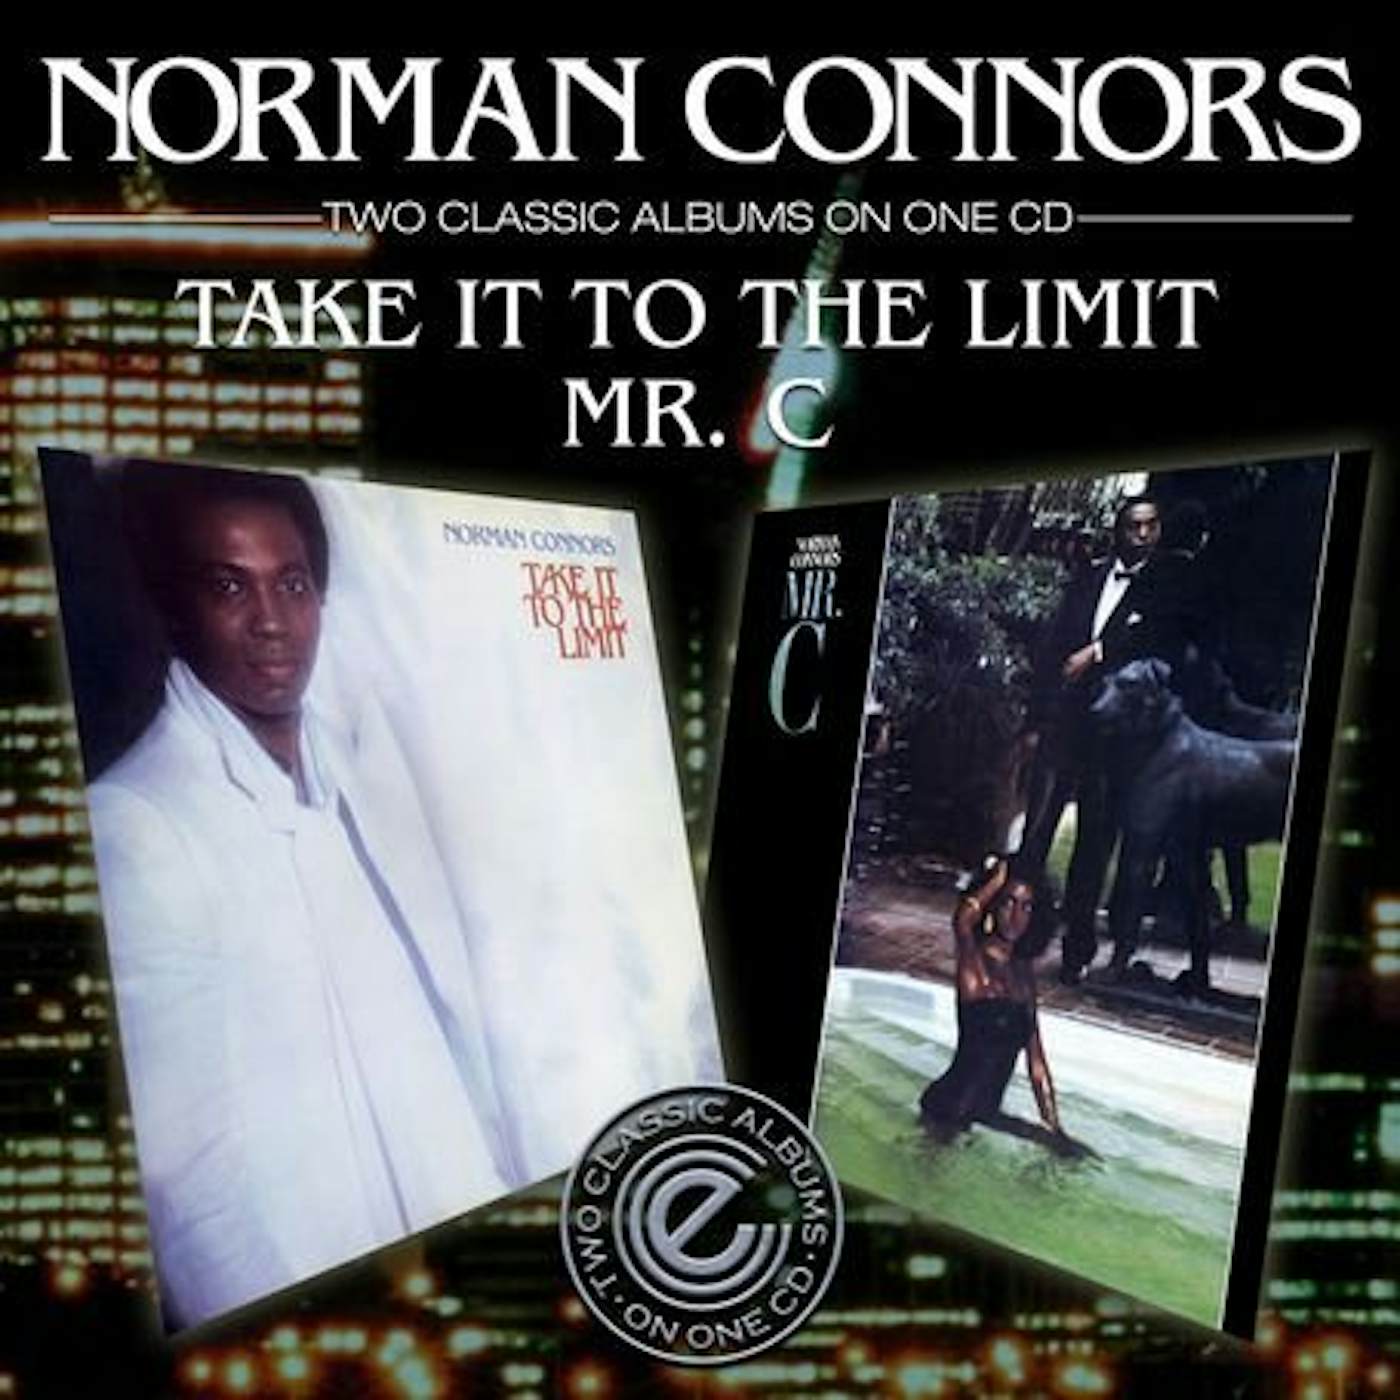 Norman Connors TAKE IT TO THE LIMIT / MR C. CD